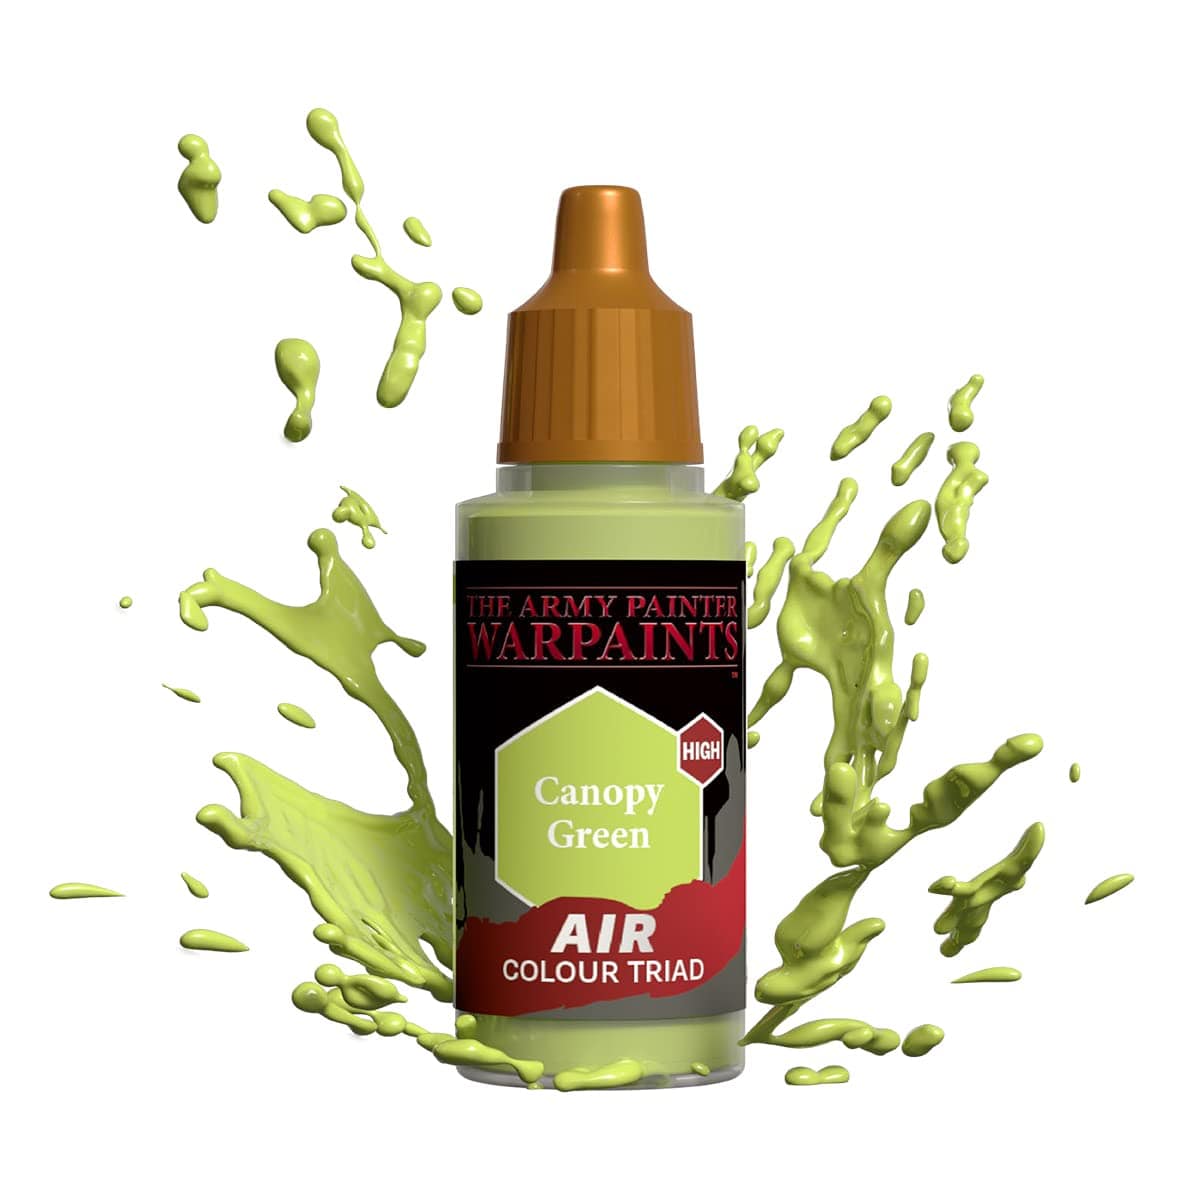 The Army Painter Accessories The Army Painter Warpaints Air: Canopy Green 18ml